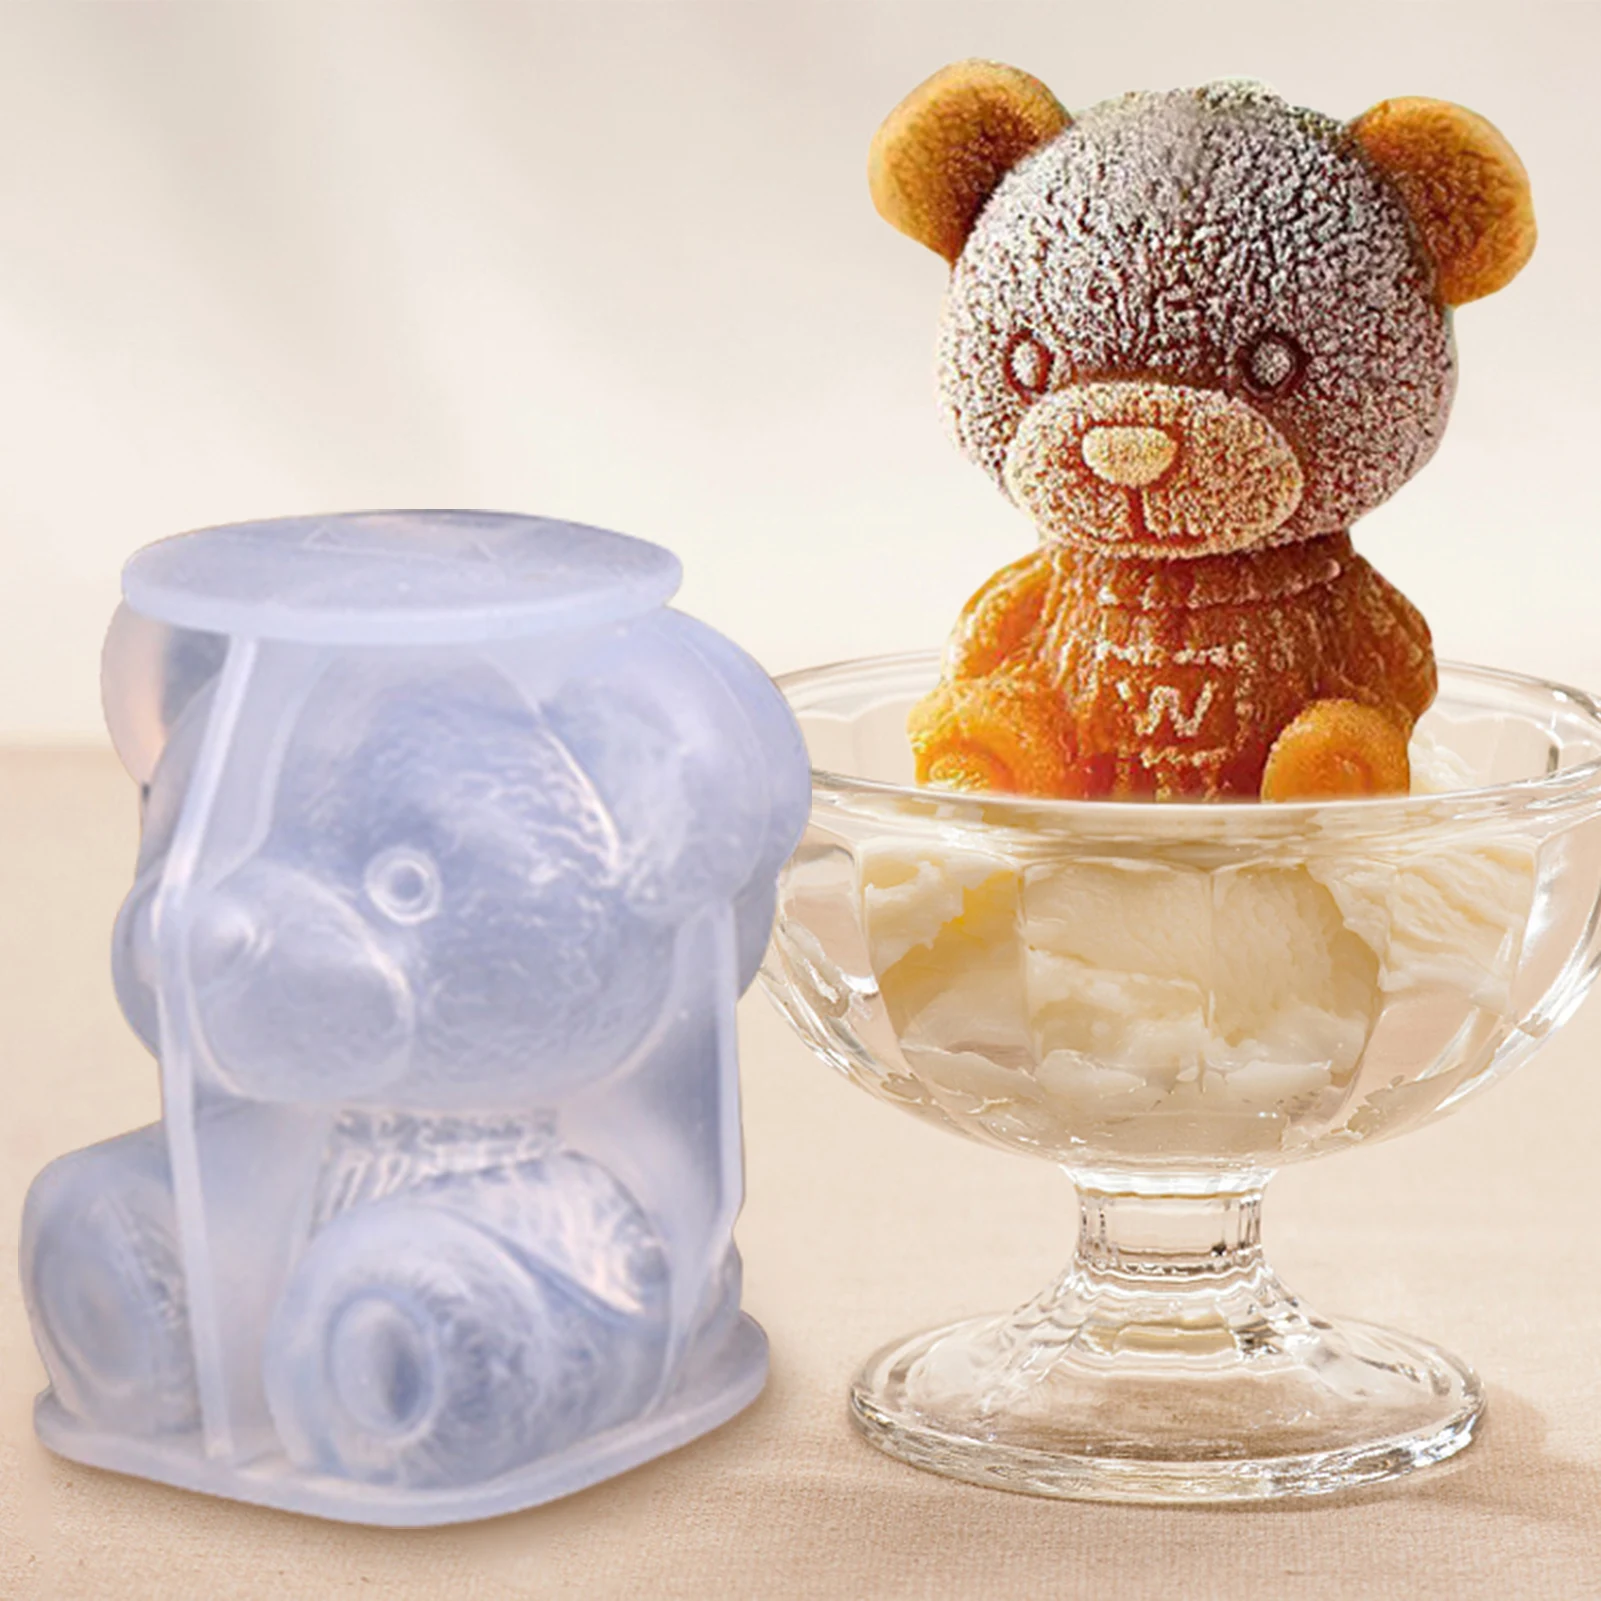 https://ae01.alicdn.com/kf/S690c9cd488224b5c92c1a96232c2a80cM/3D-Teddy-Bear-Ice-Cube-Maker-Ice-Cube-Tray-Silicone-Mold-Chocolate-Ice-Mould-Whiskey-Wine.jpg